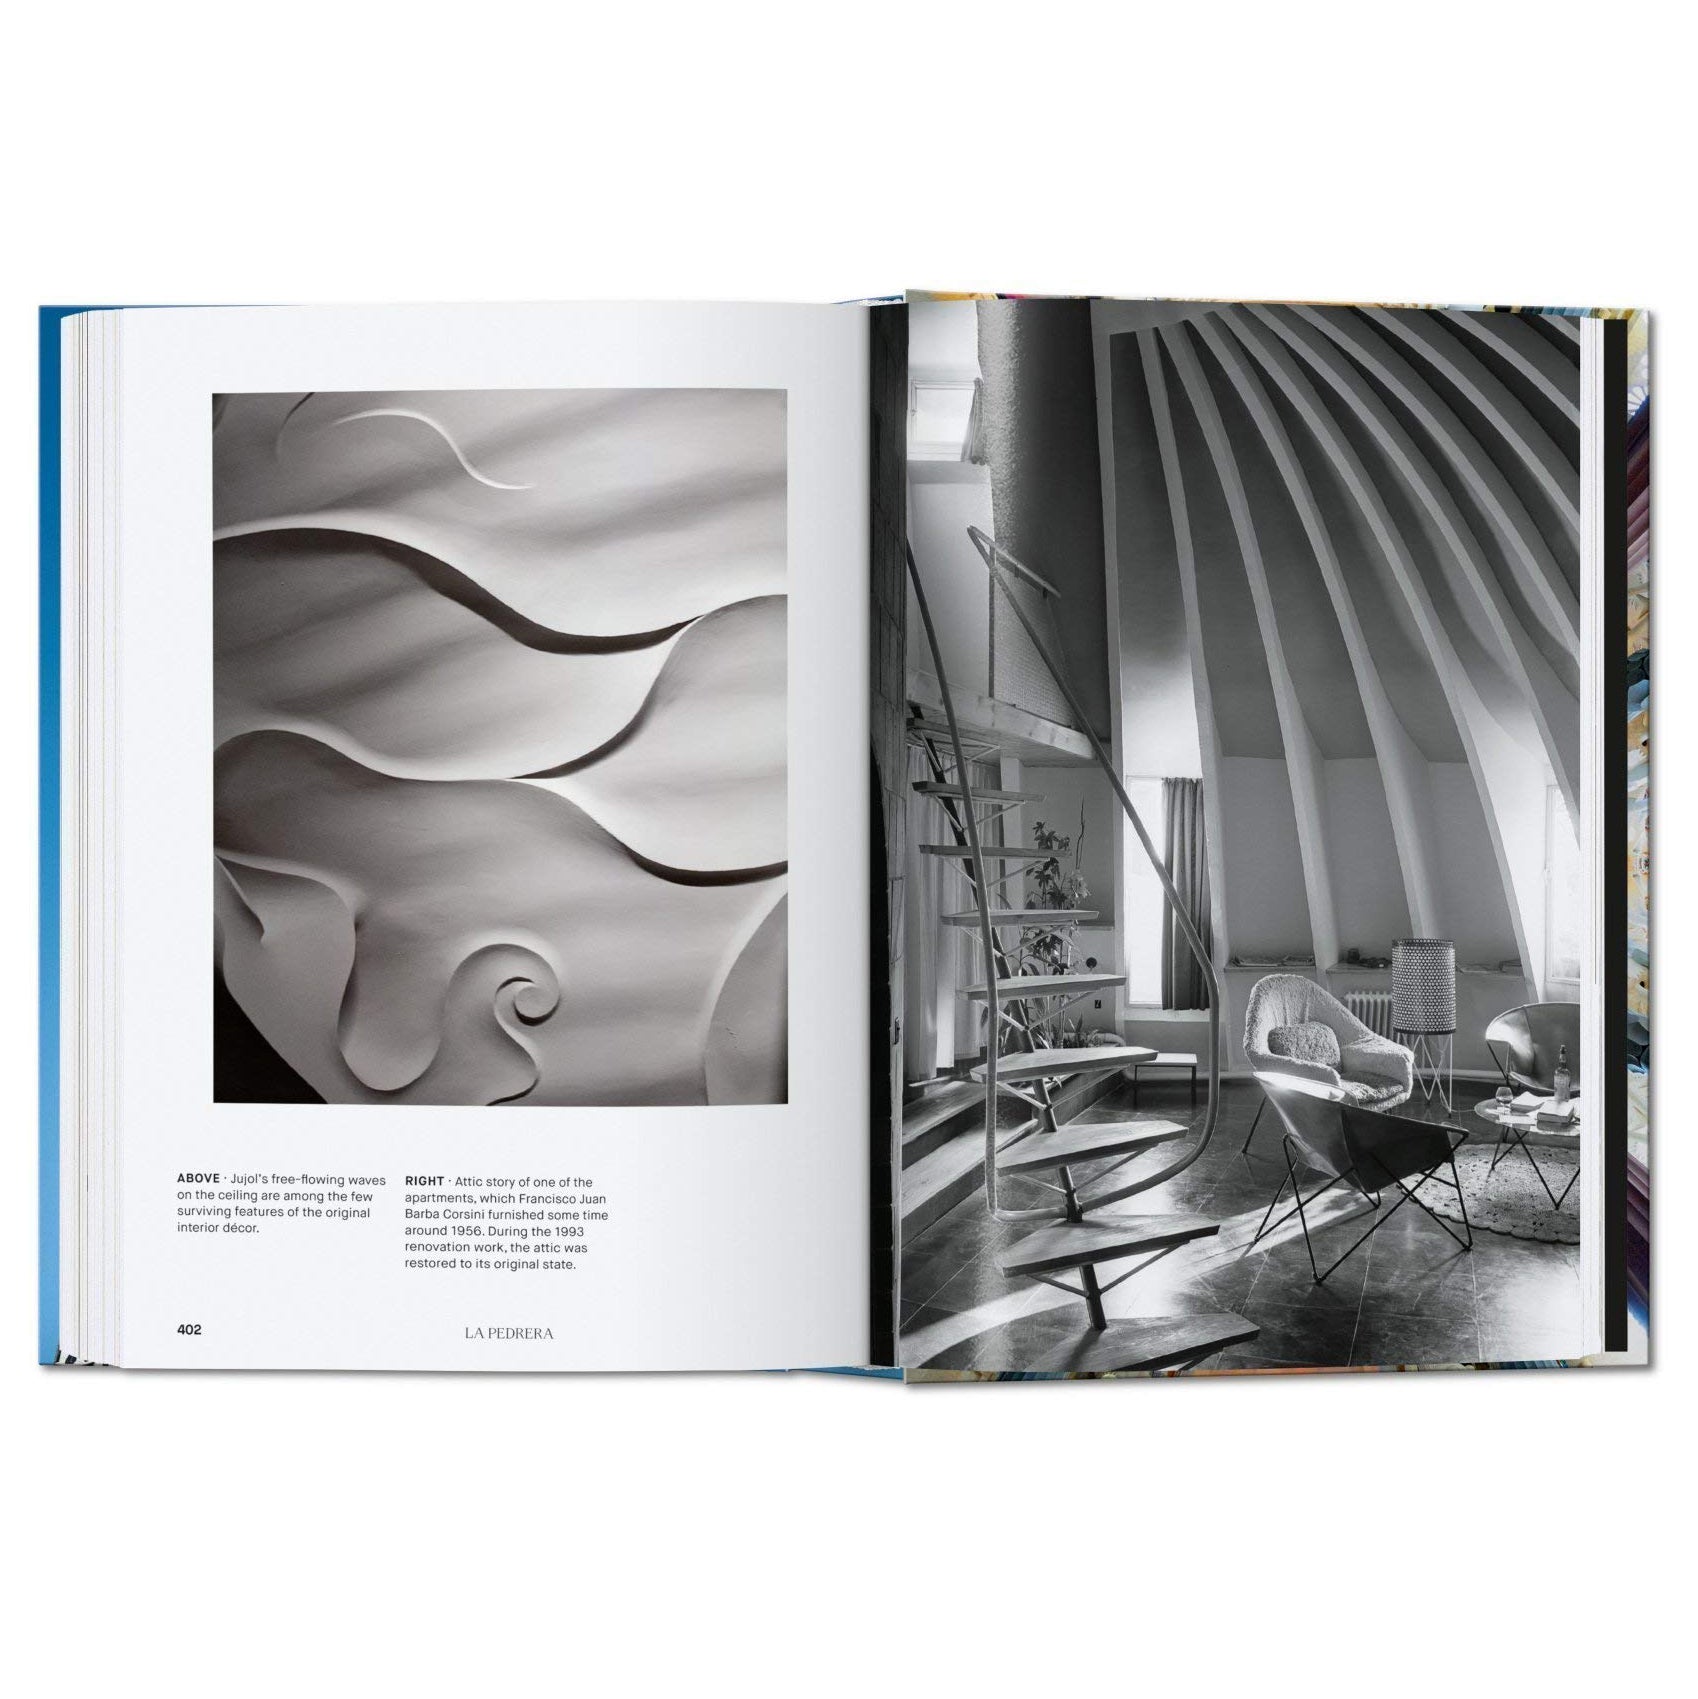 Gaudí. The Complete Works - 40th Anniversary Edition - Secret Location